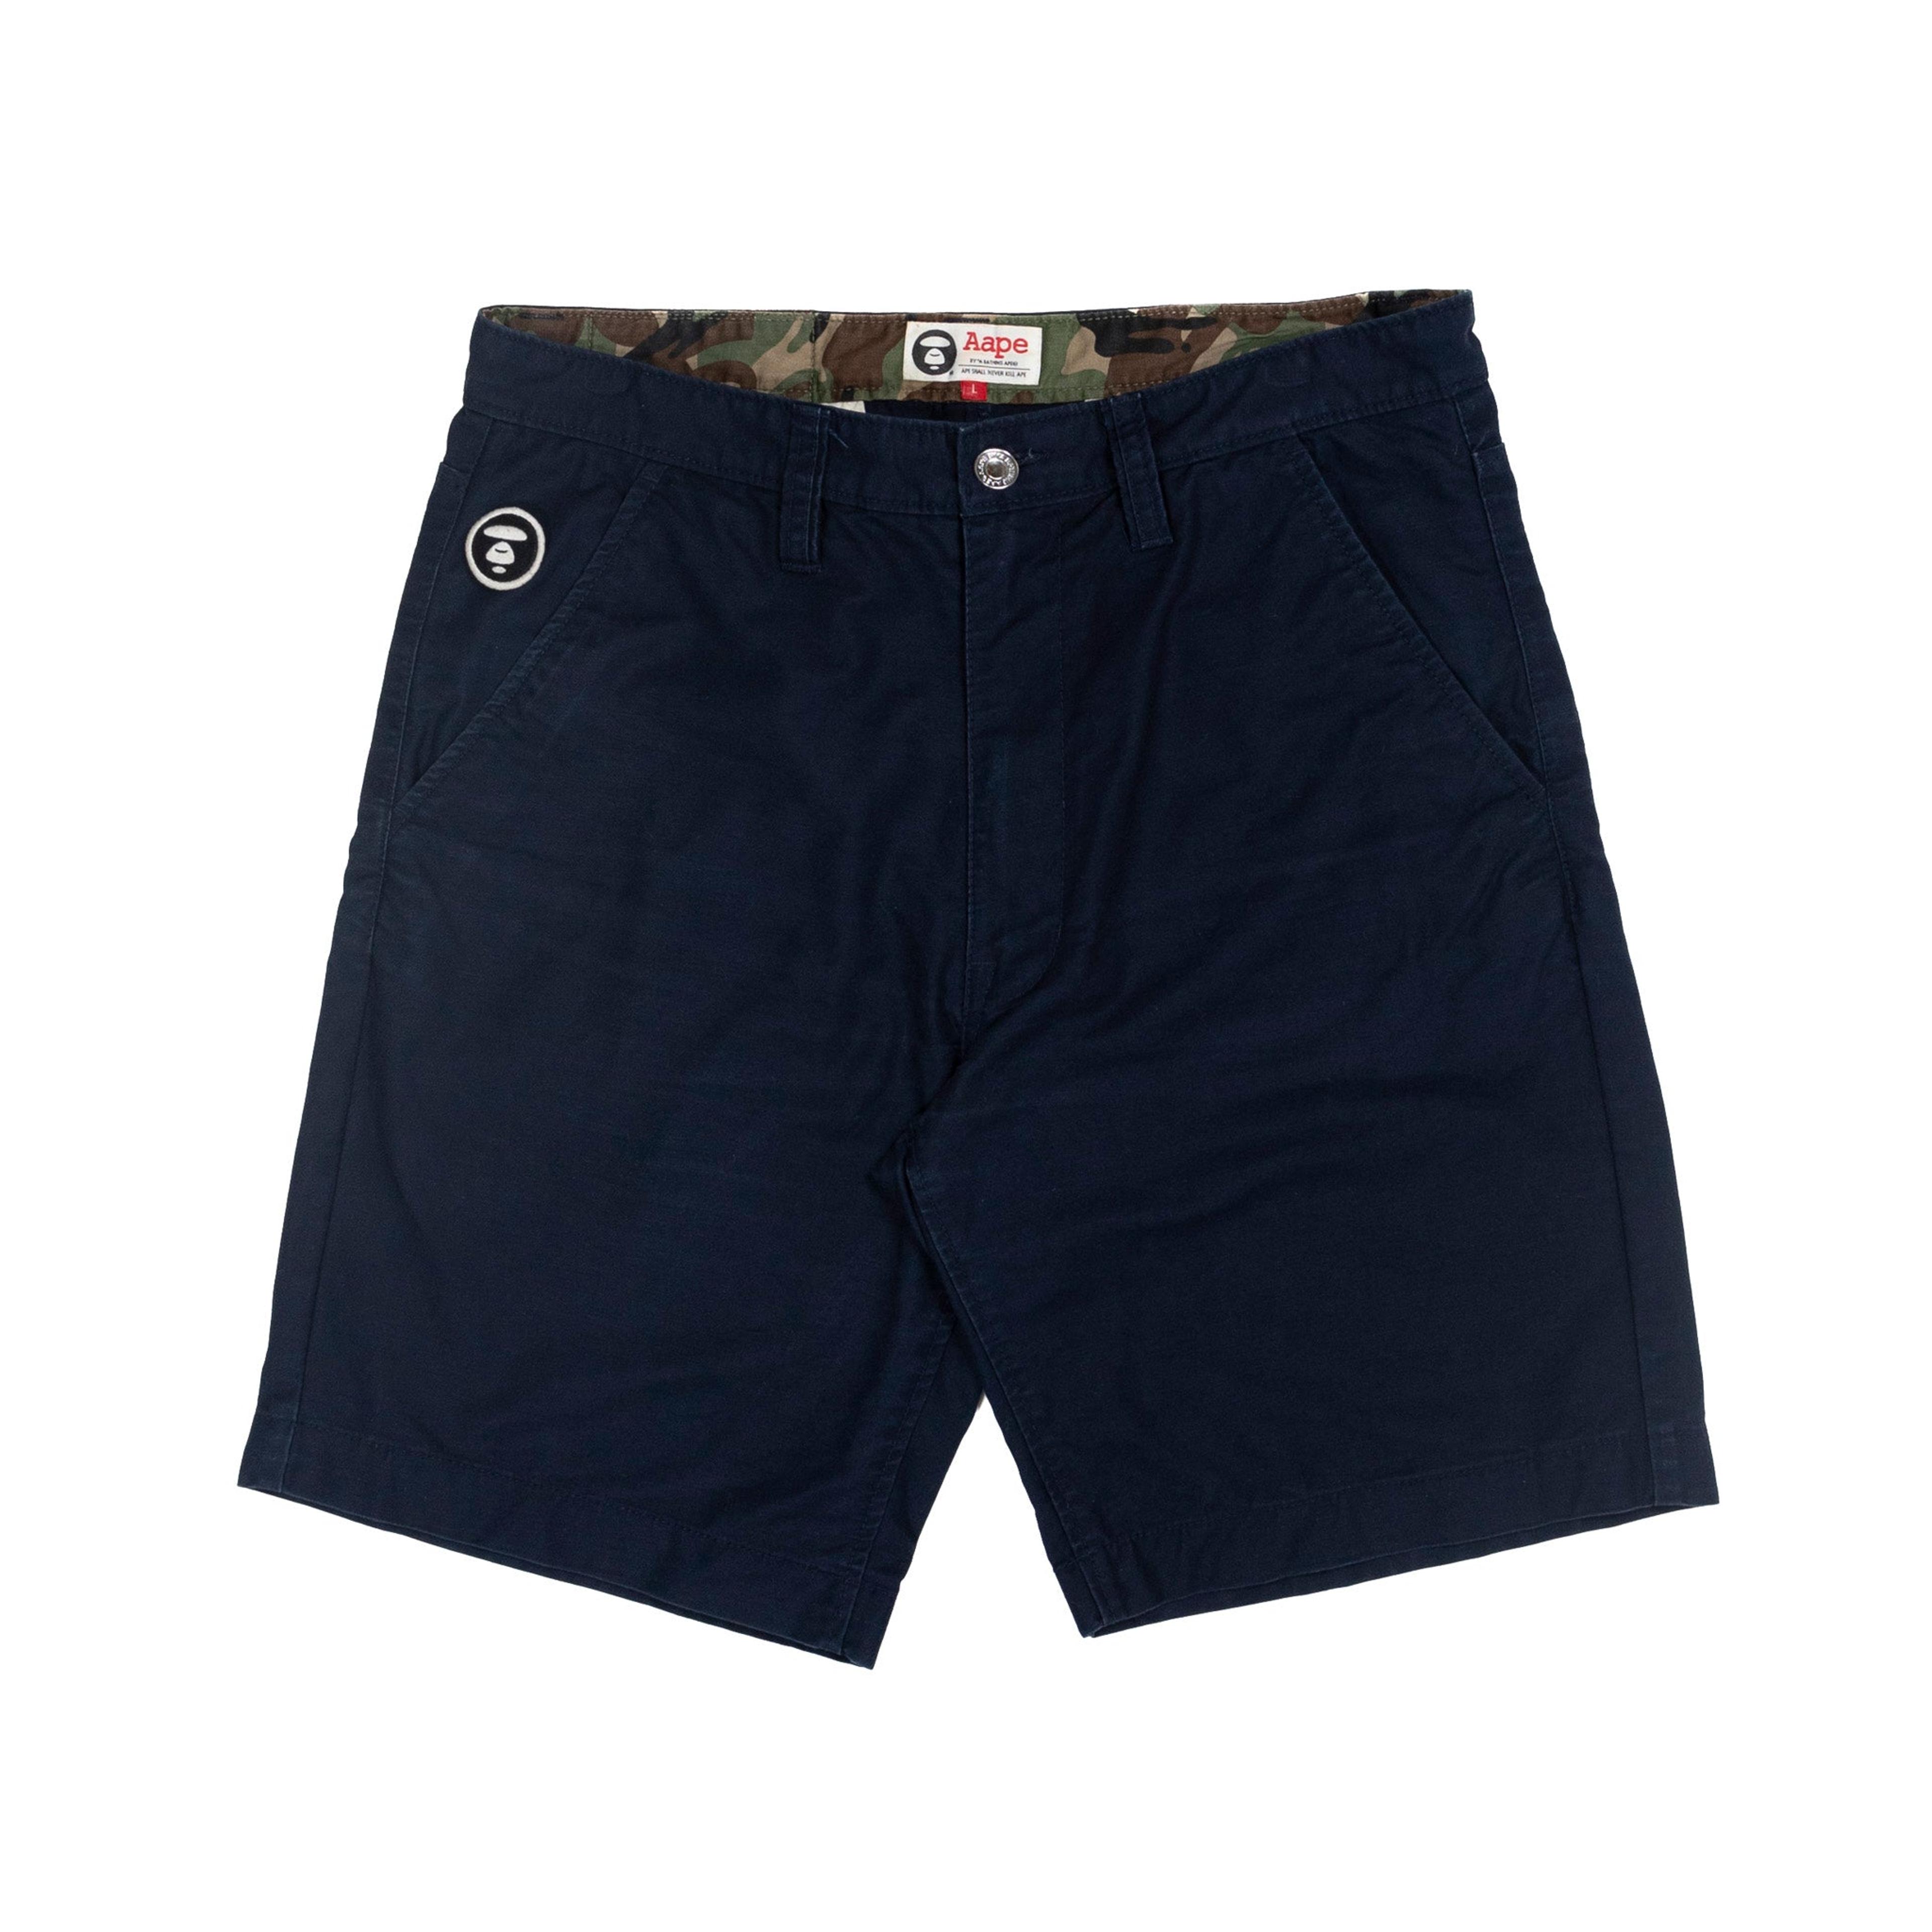 Aape by A Bathing Ape Summer Shorts